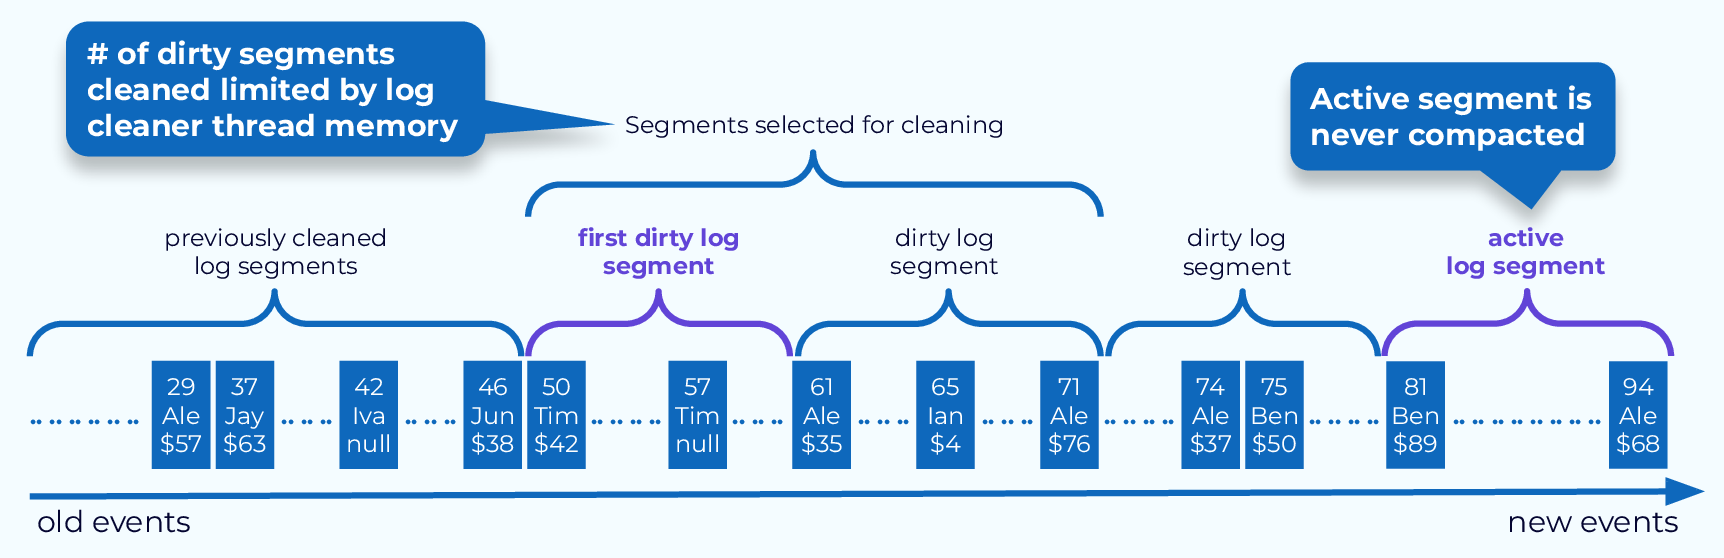 compaction-segments-to-clean